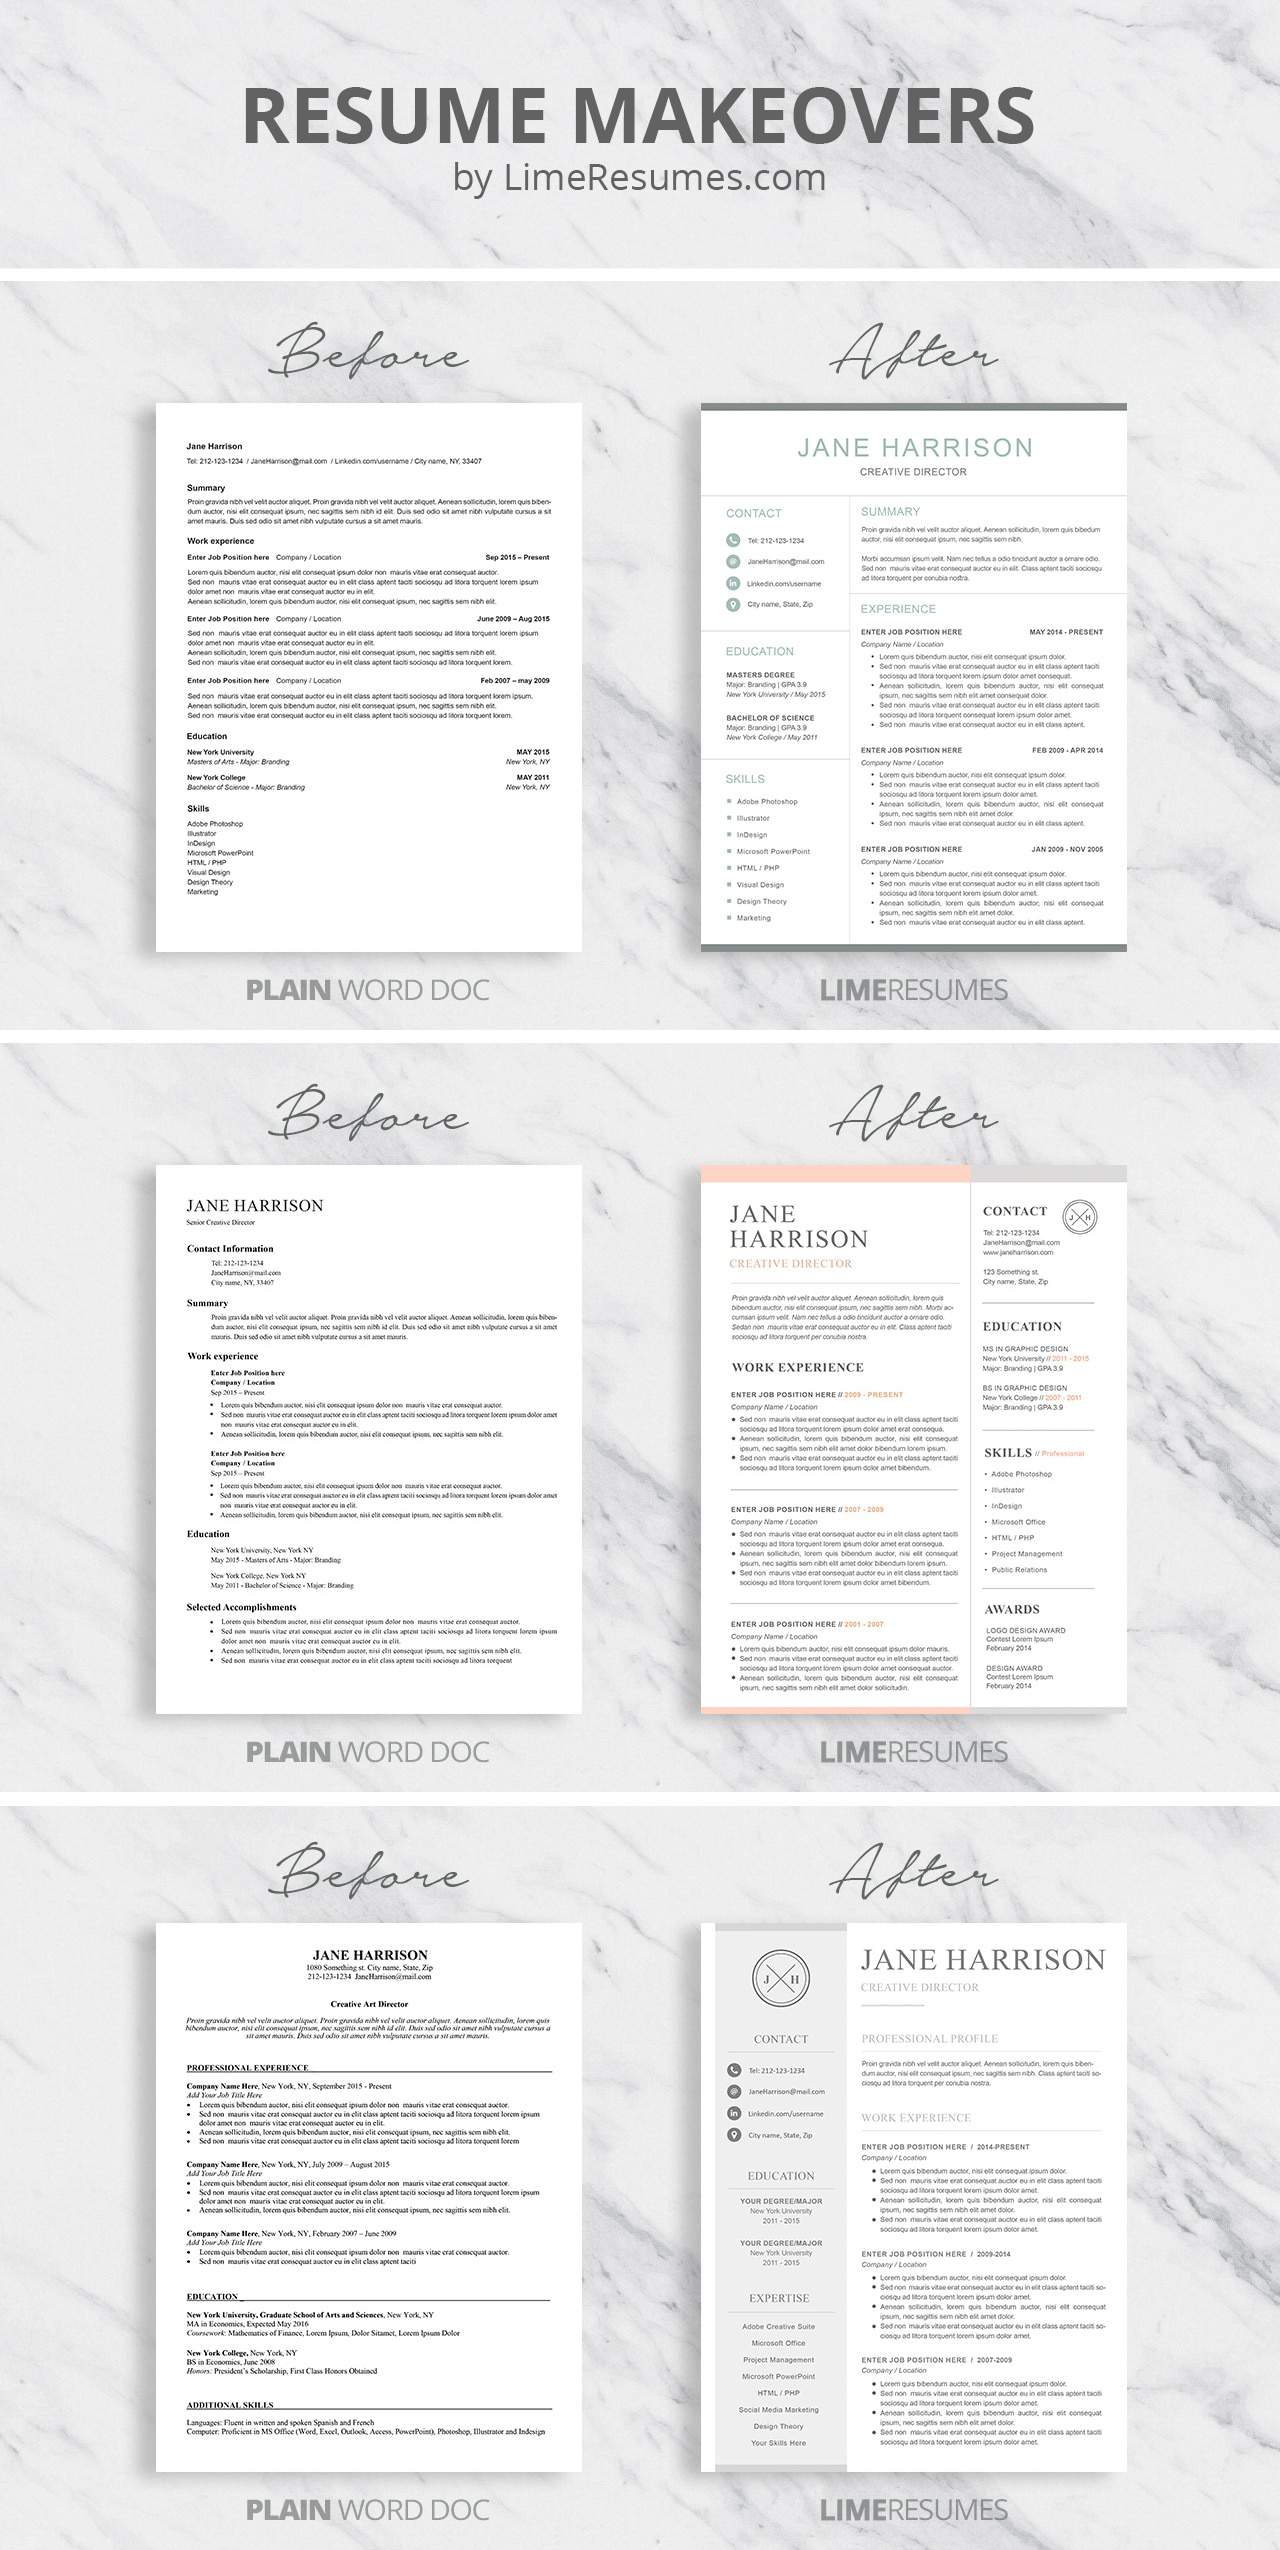 Resume templates for marketing professionals